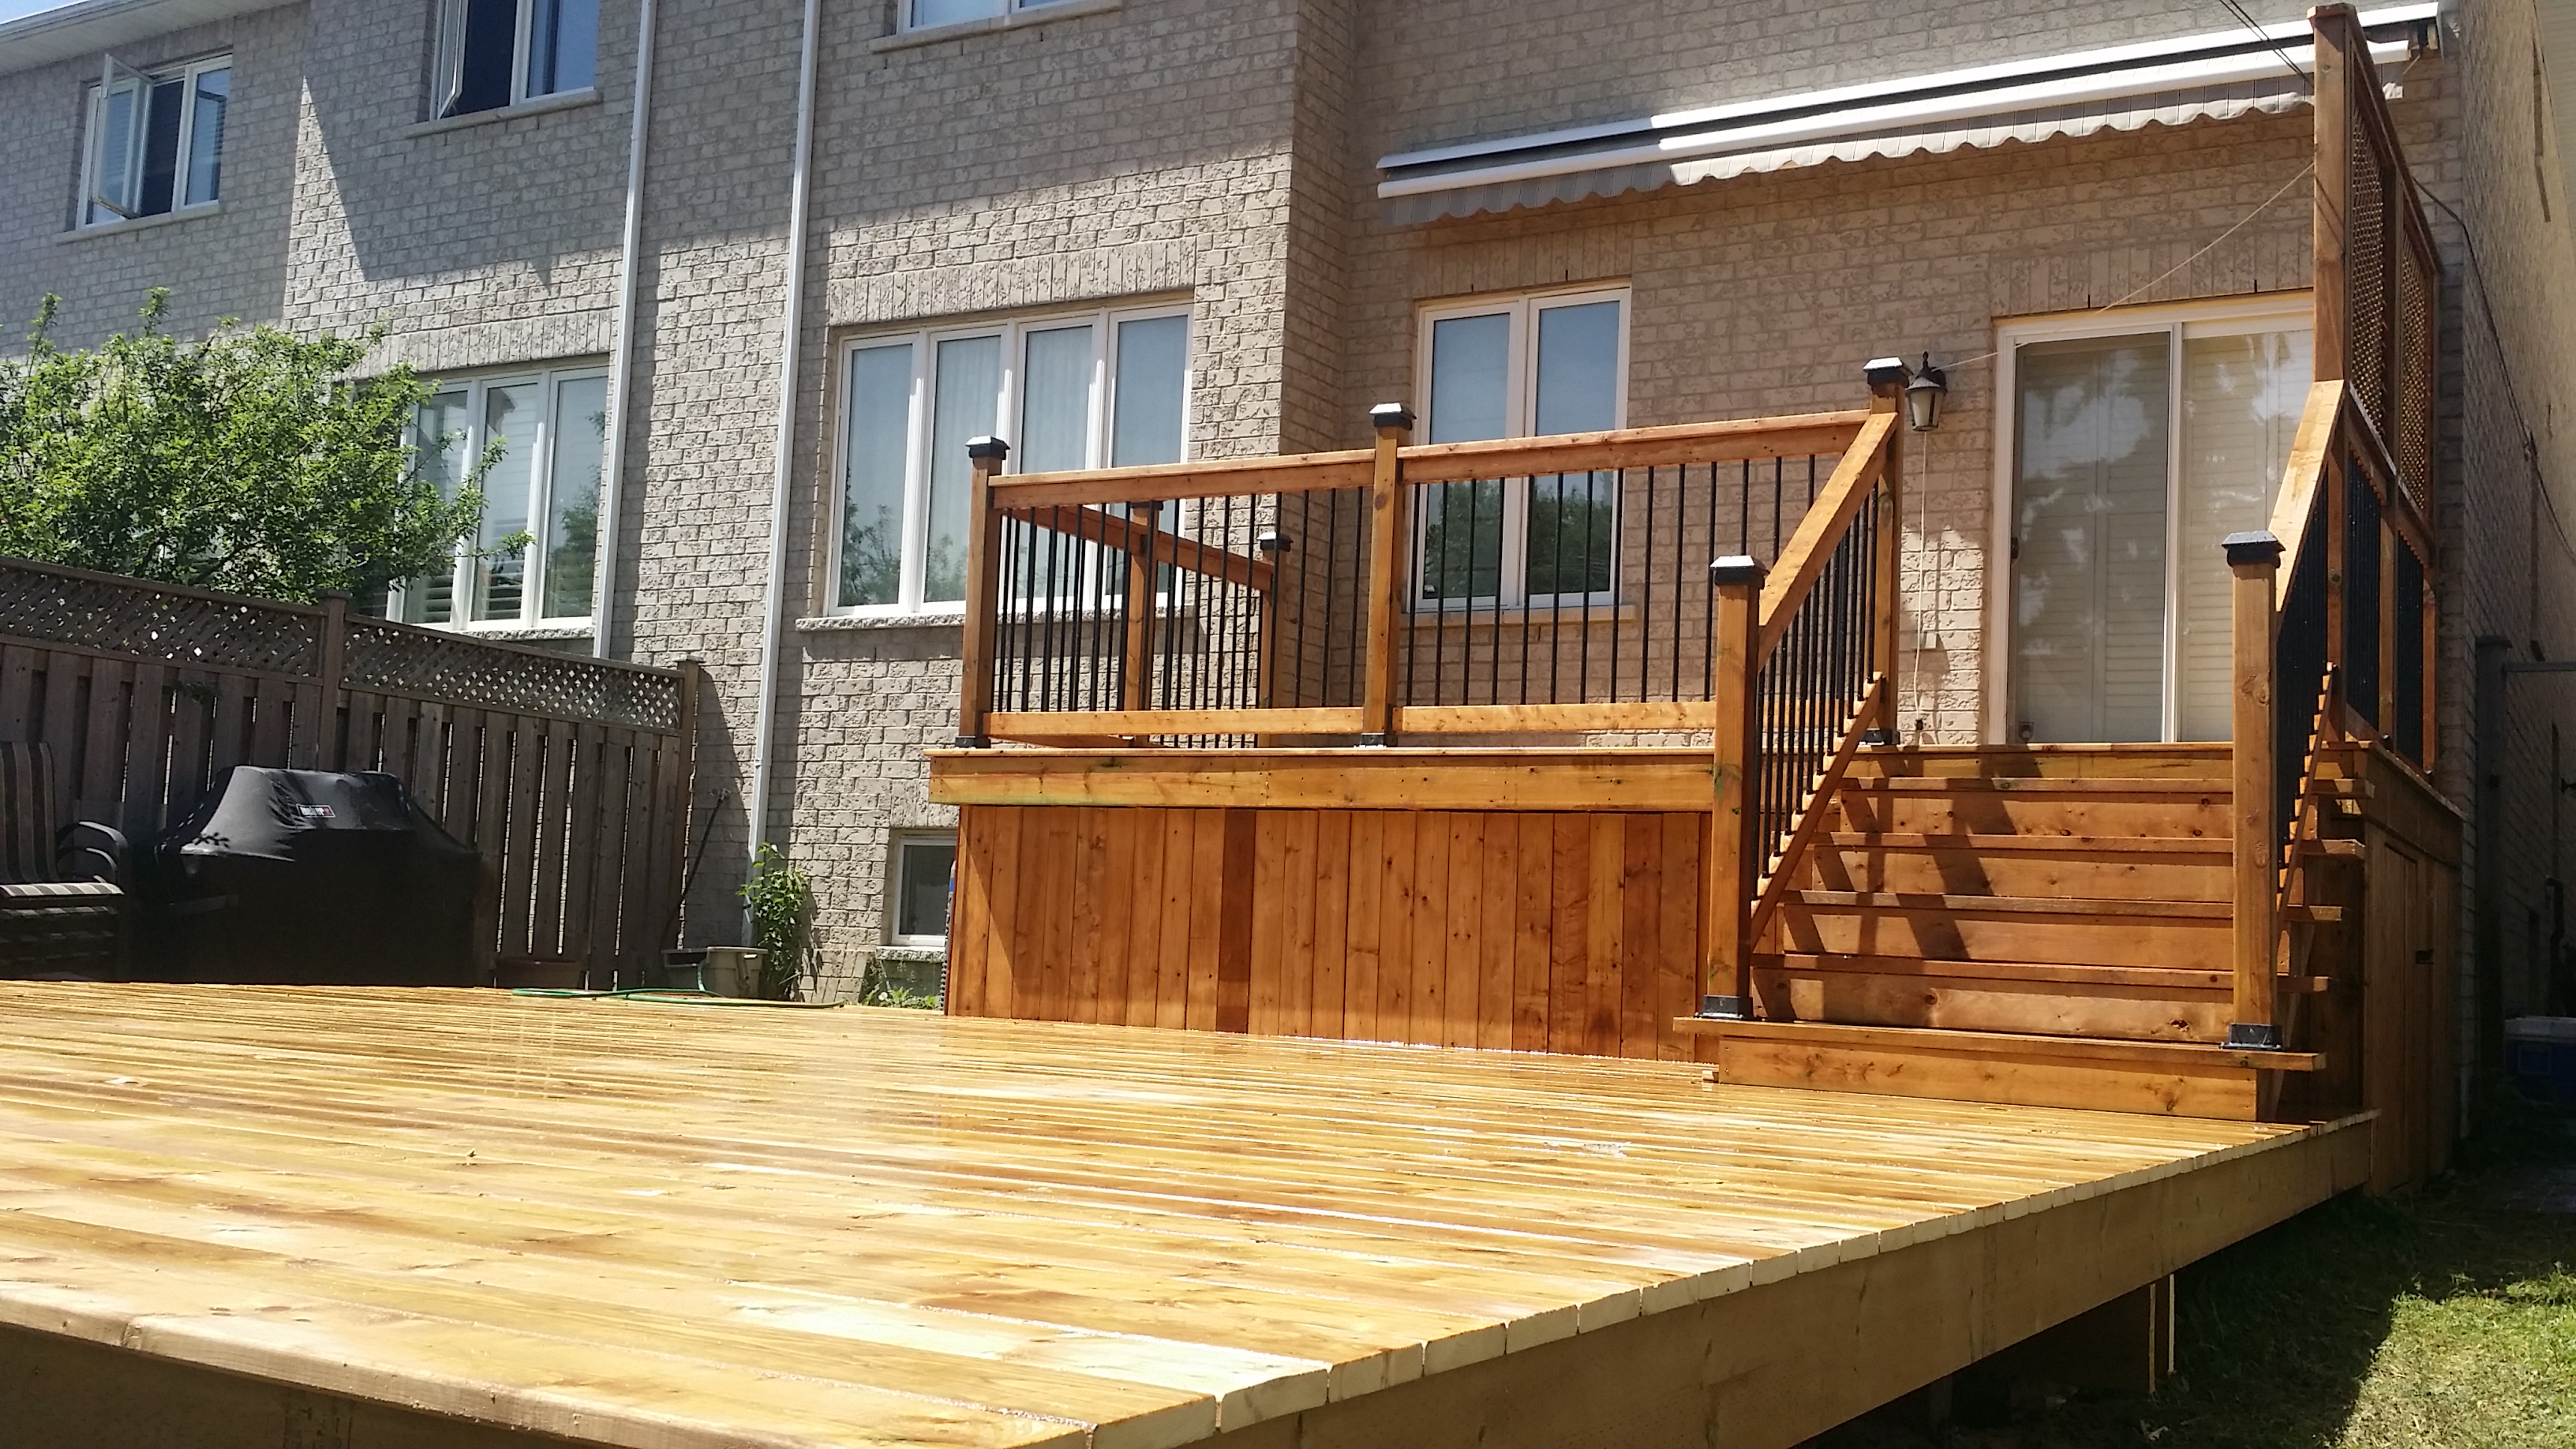 At Keinzen we build high quality patios at an affordable price. Call us now at 416 429 4682 for a free estimate.